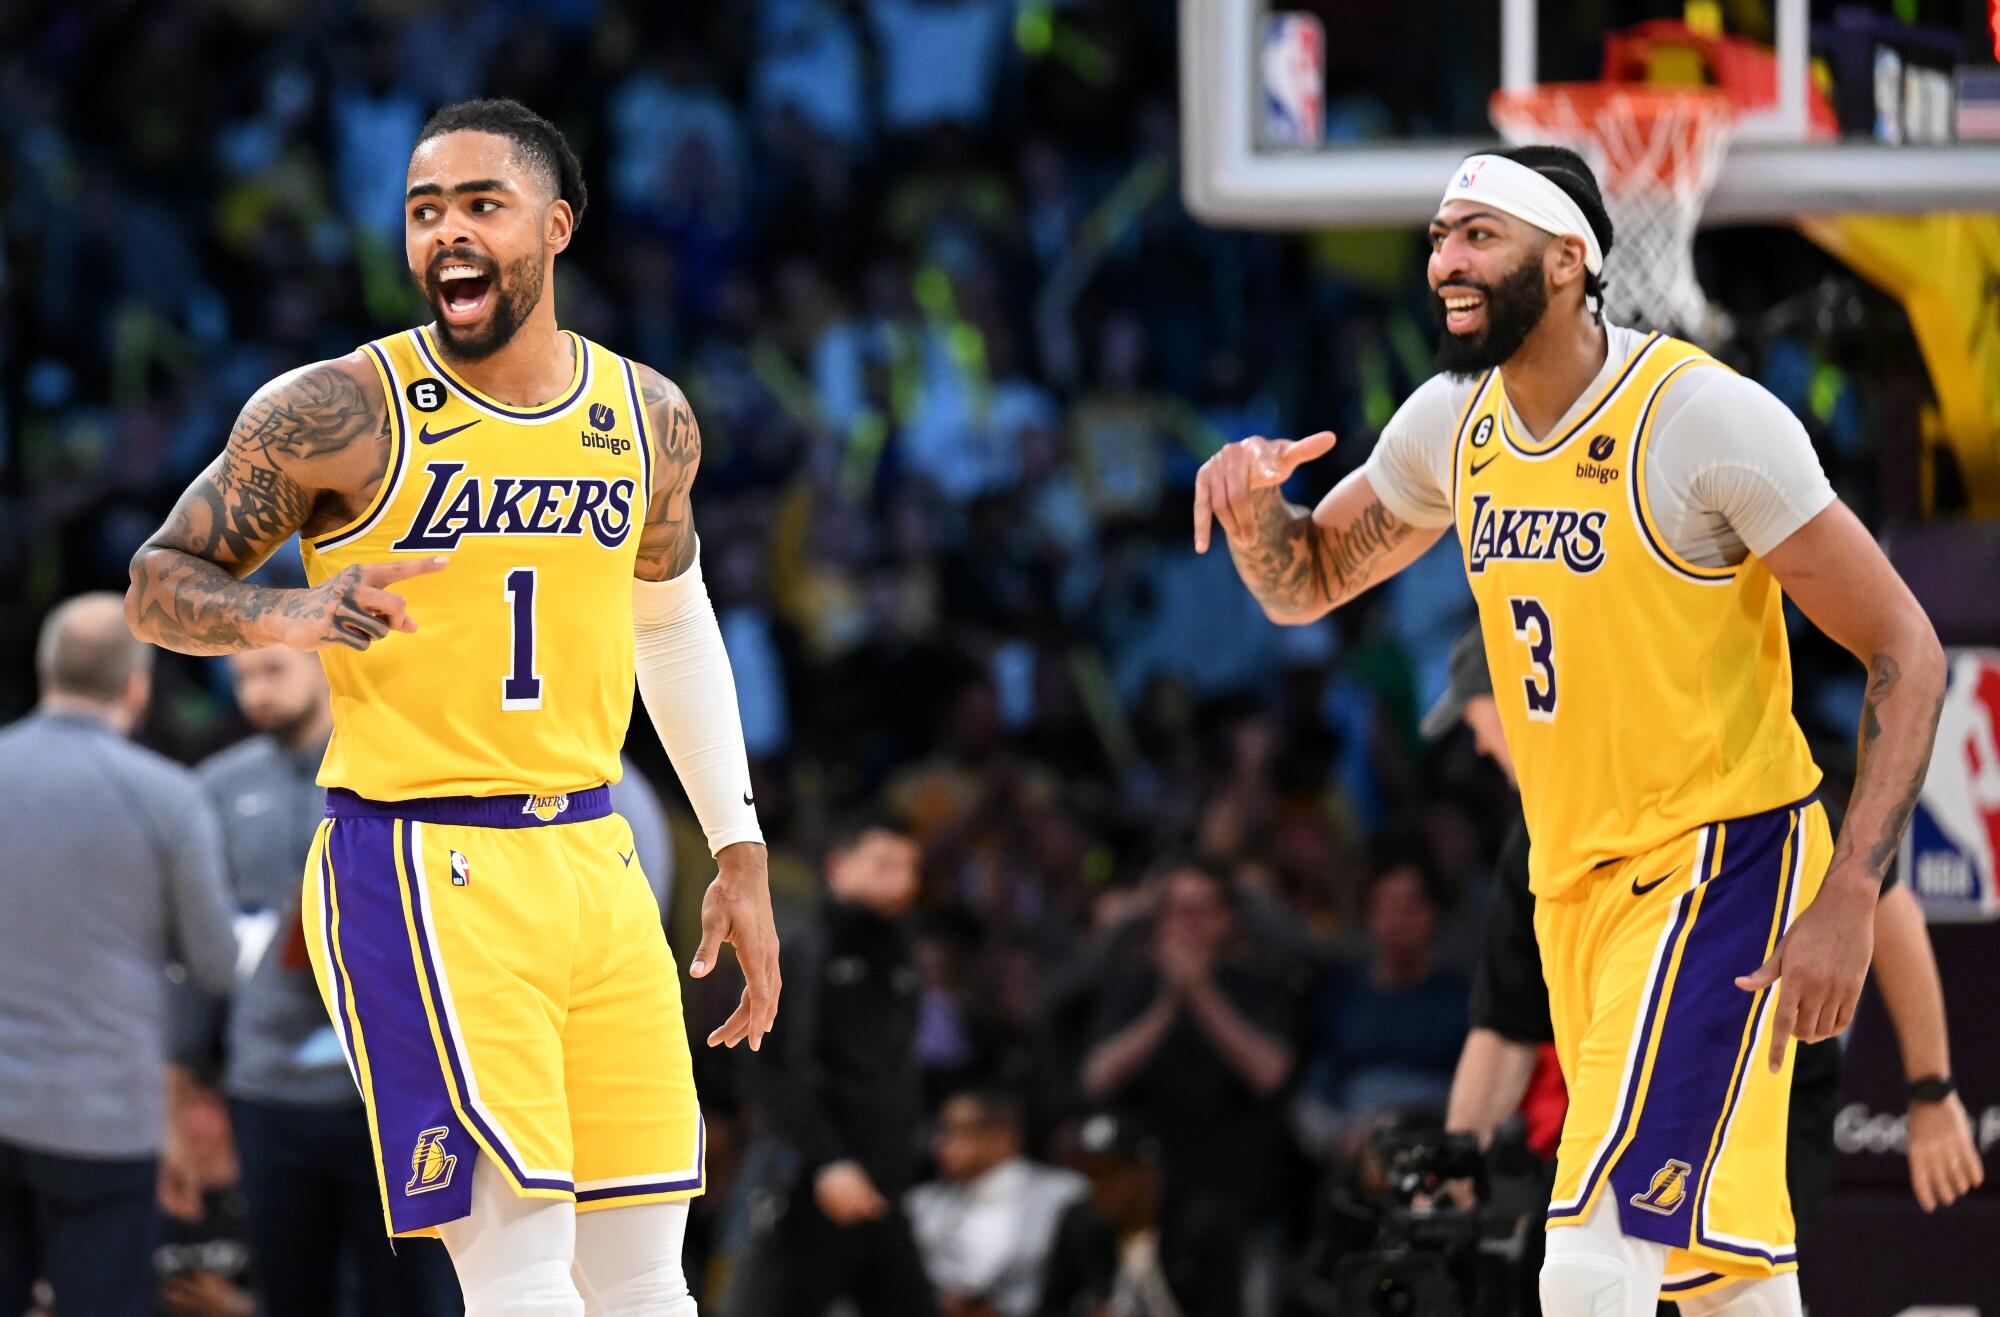 Lakers guard D'Angelo Russell celebrates a three-pointer with forward Anthony Davis.